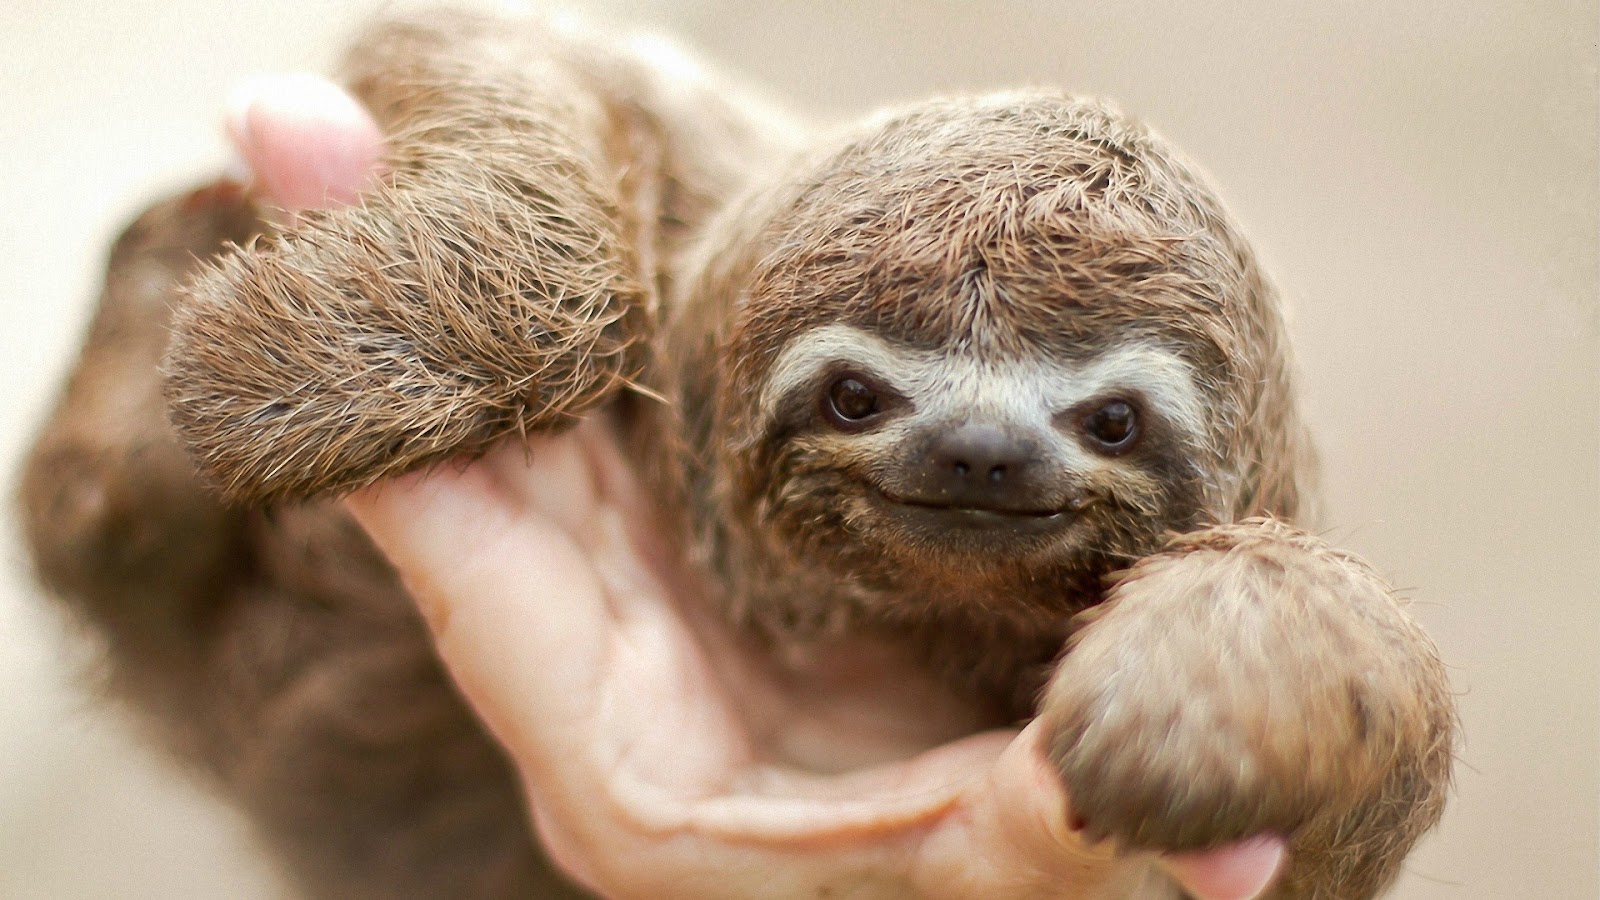 Twisted S Wallpaper A Smiling Baby Sloth